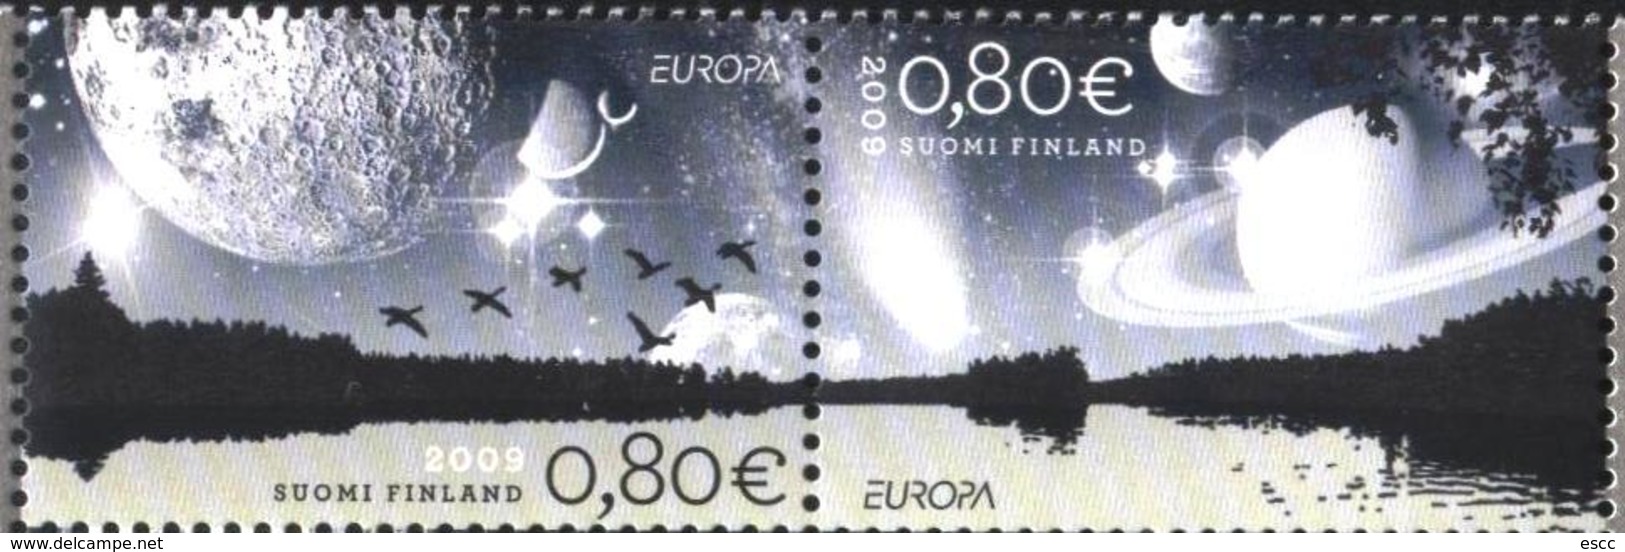 Mint Stamps Europa CEPT 2009 From Finland - 2009